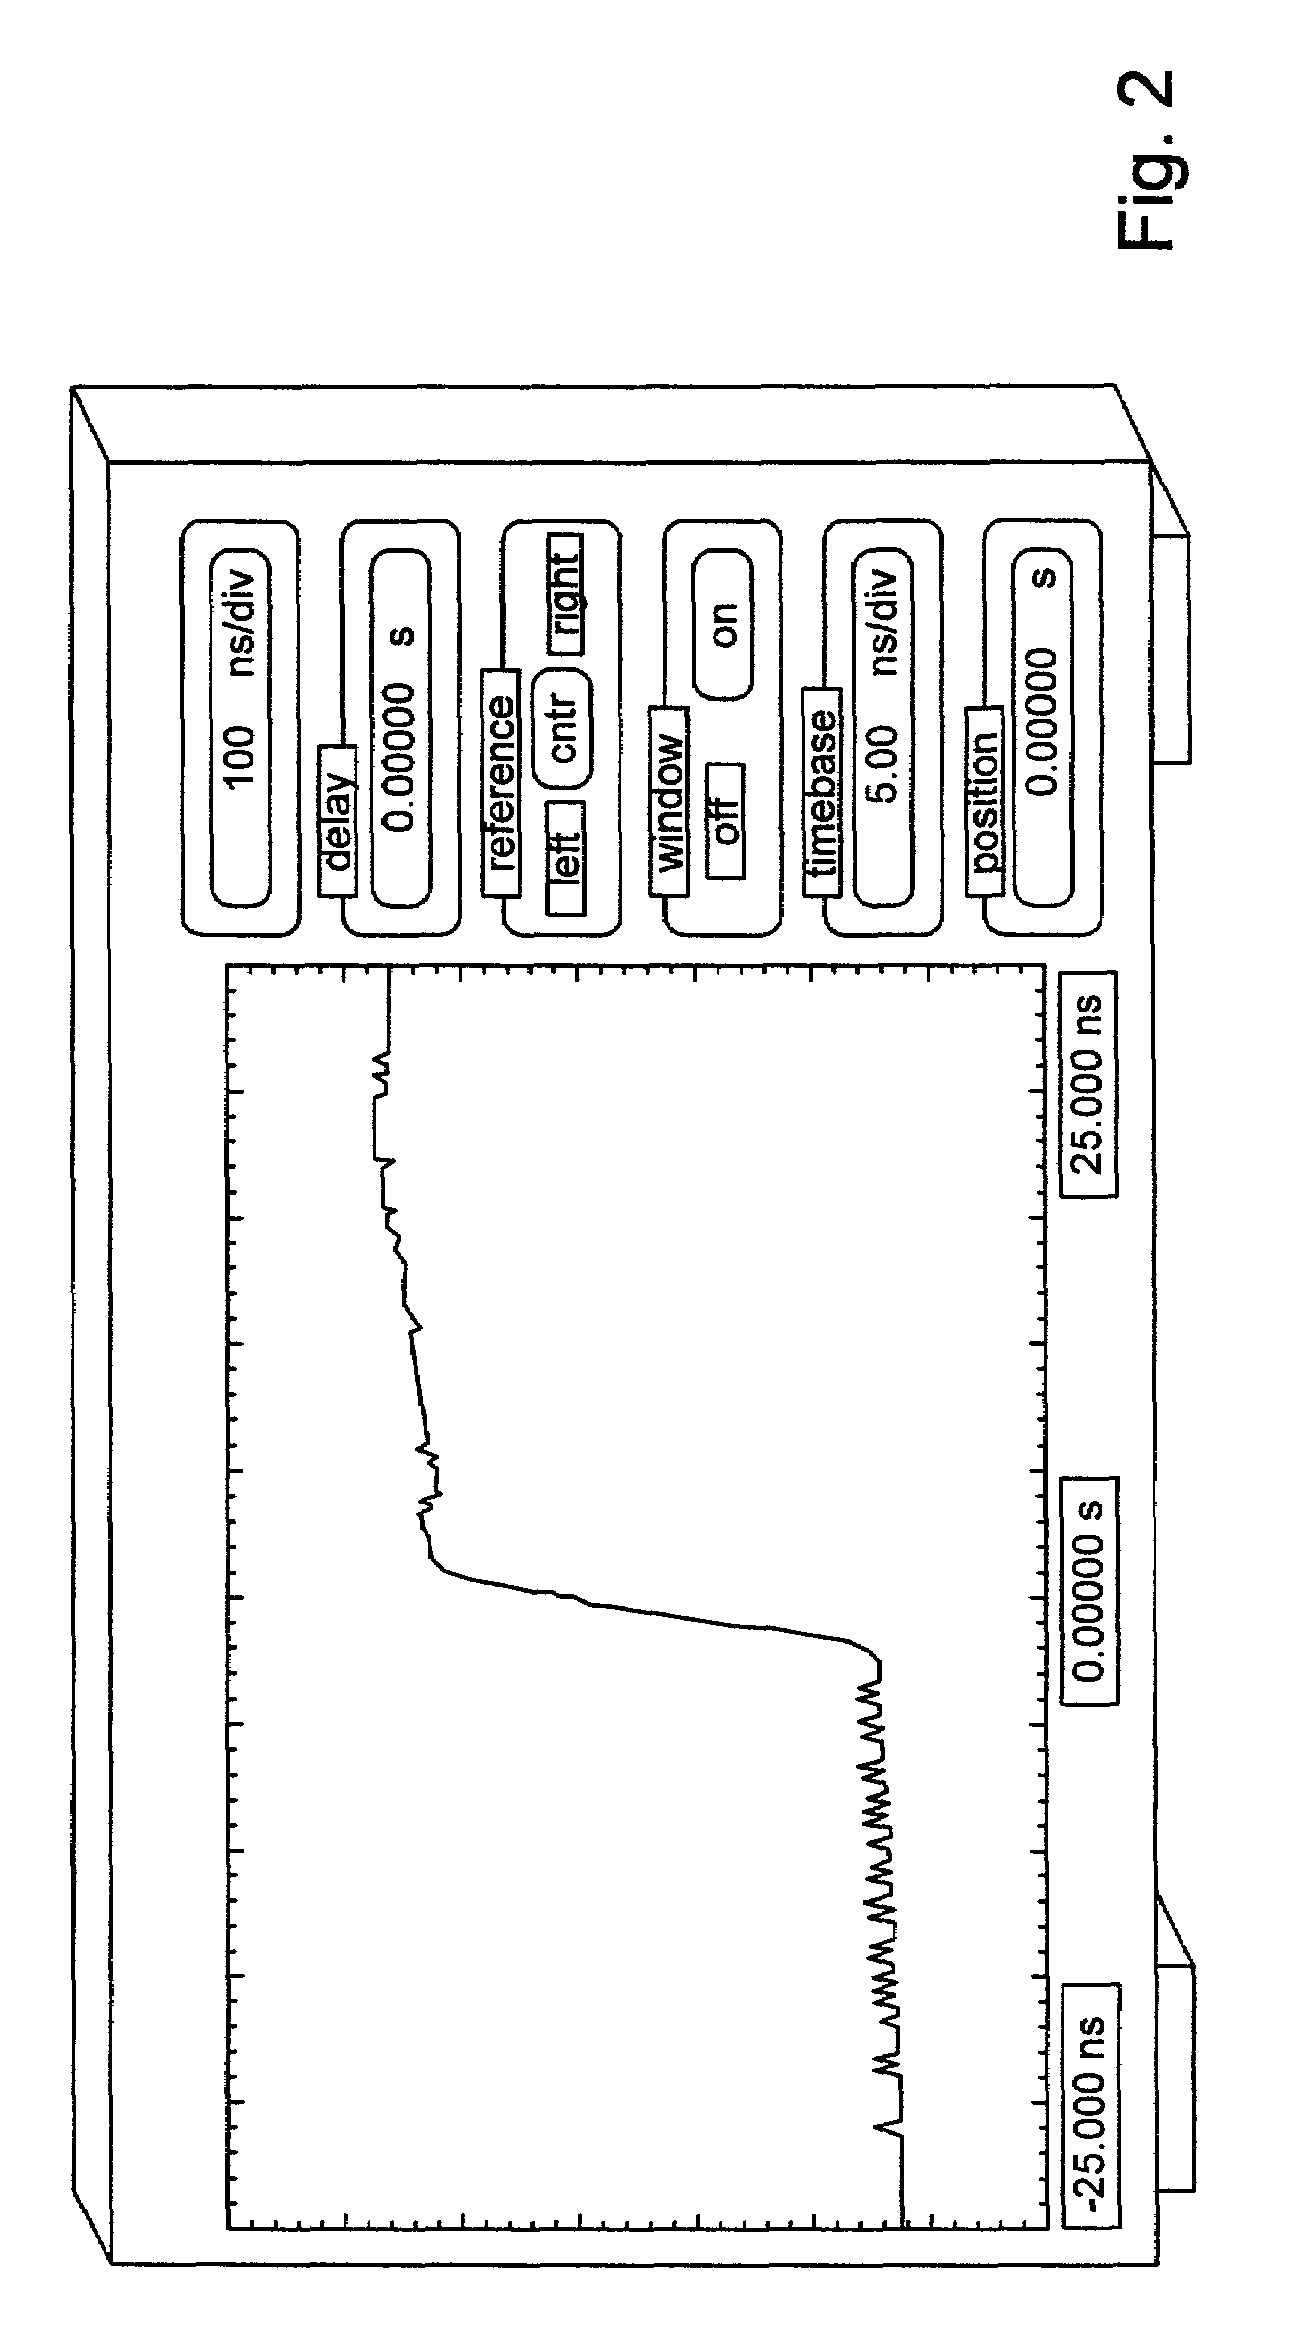 Instrument having a virtual magnifying glass for displaying magnified portions of a signal waveform